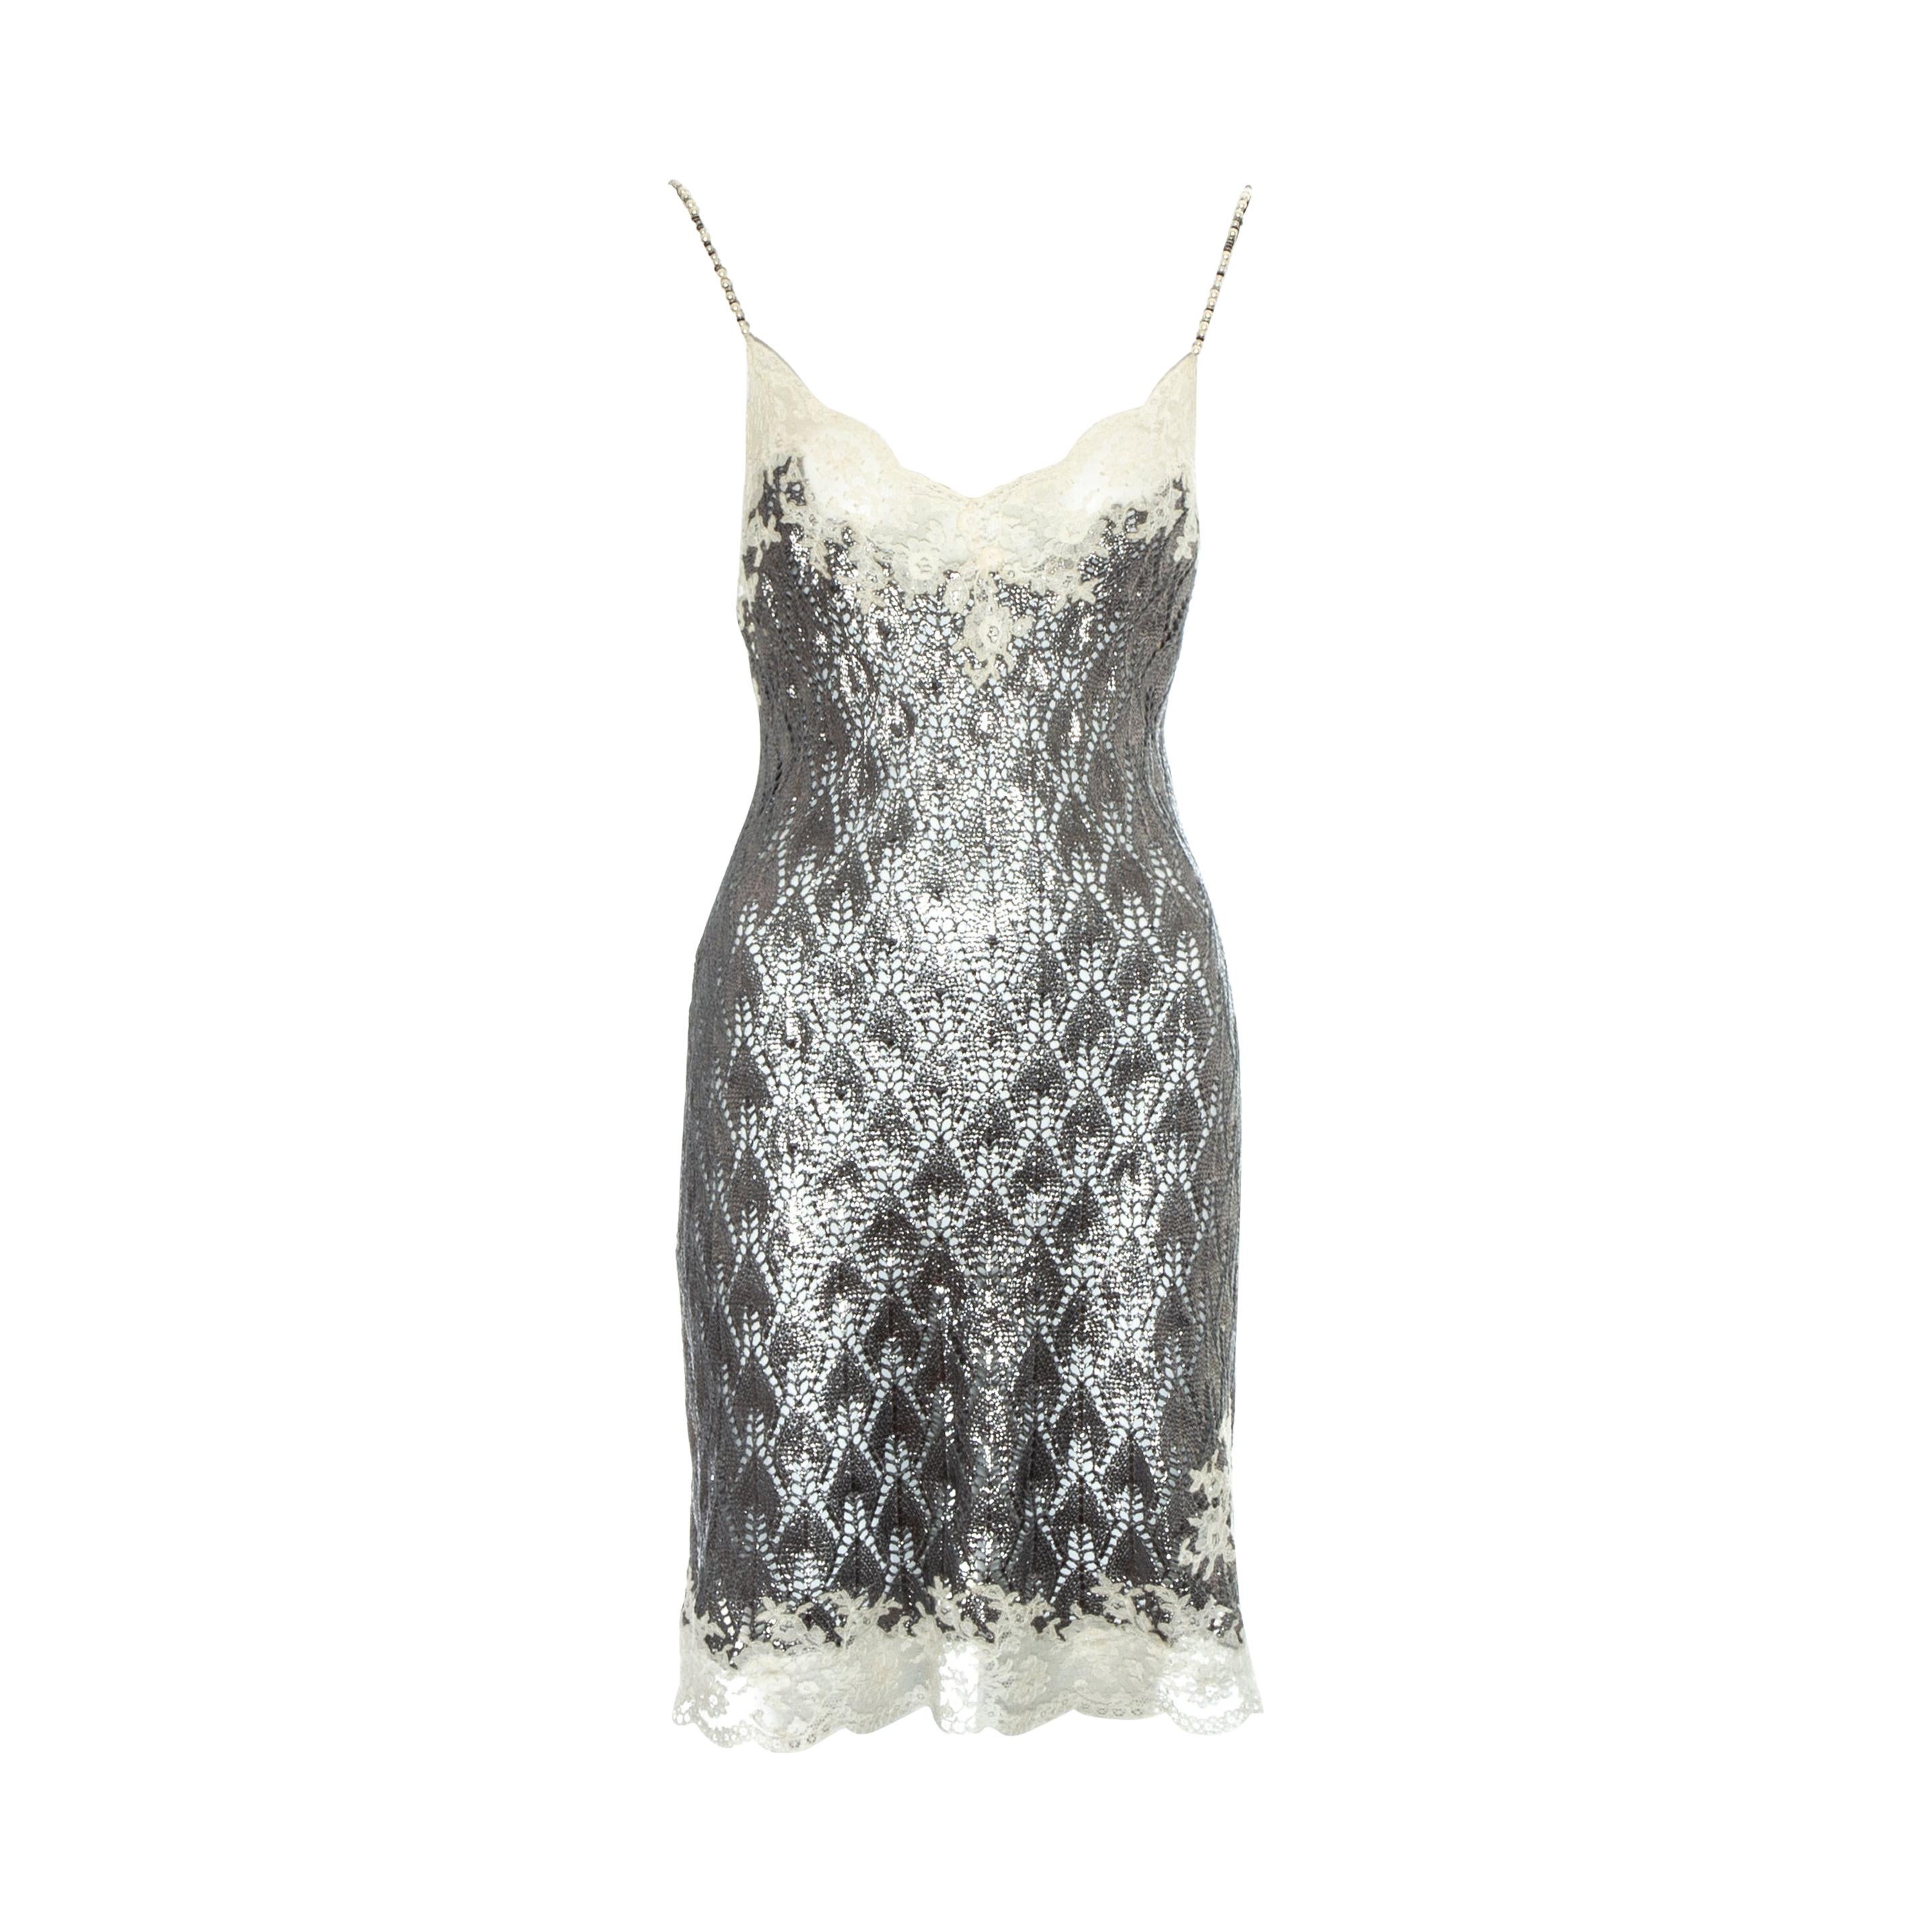 Christian Dior by John Galliano silver crochet knit and lace slip dress, ss 1998